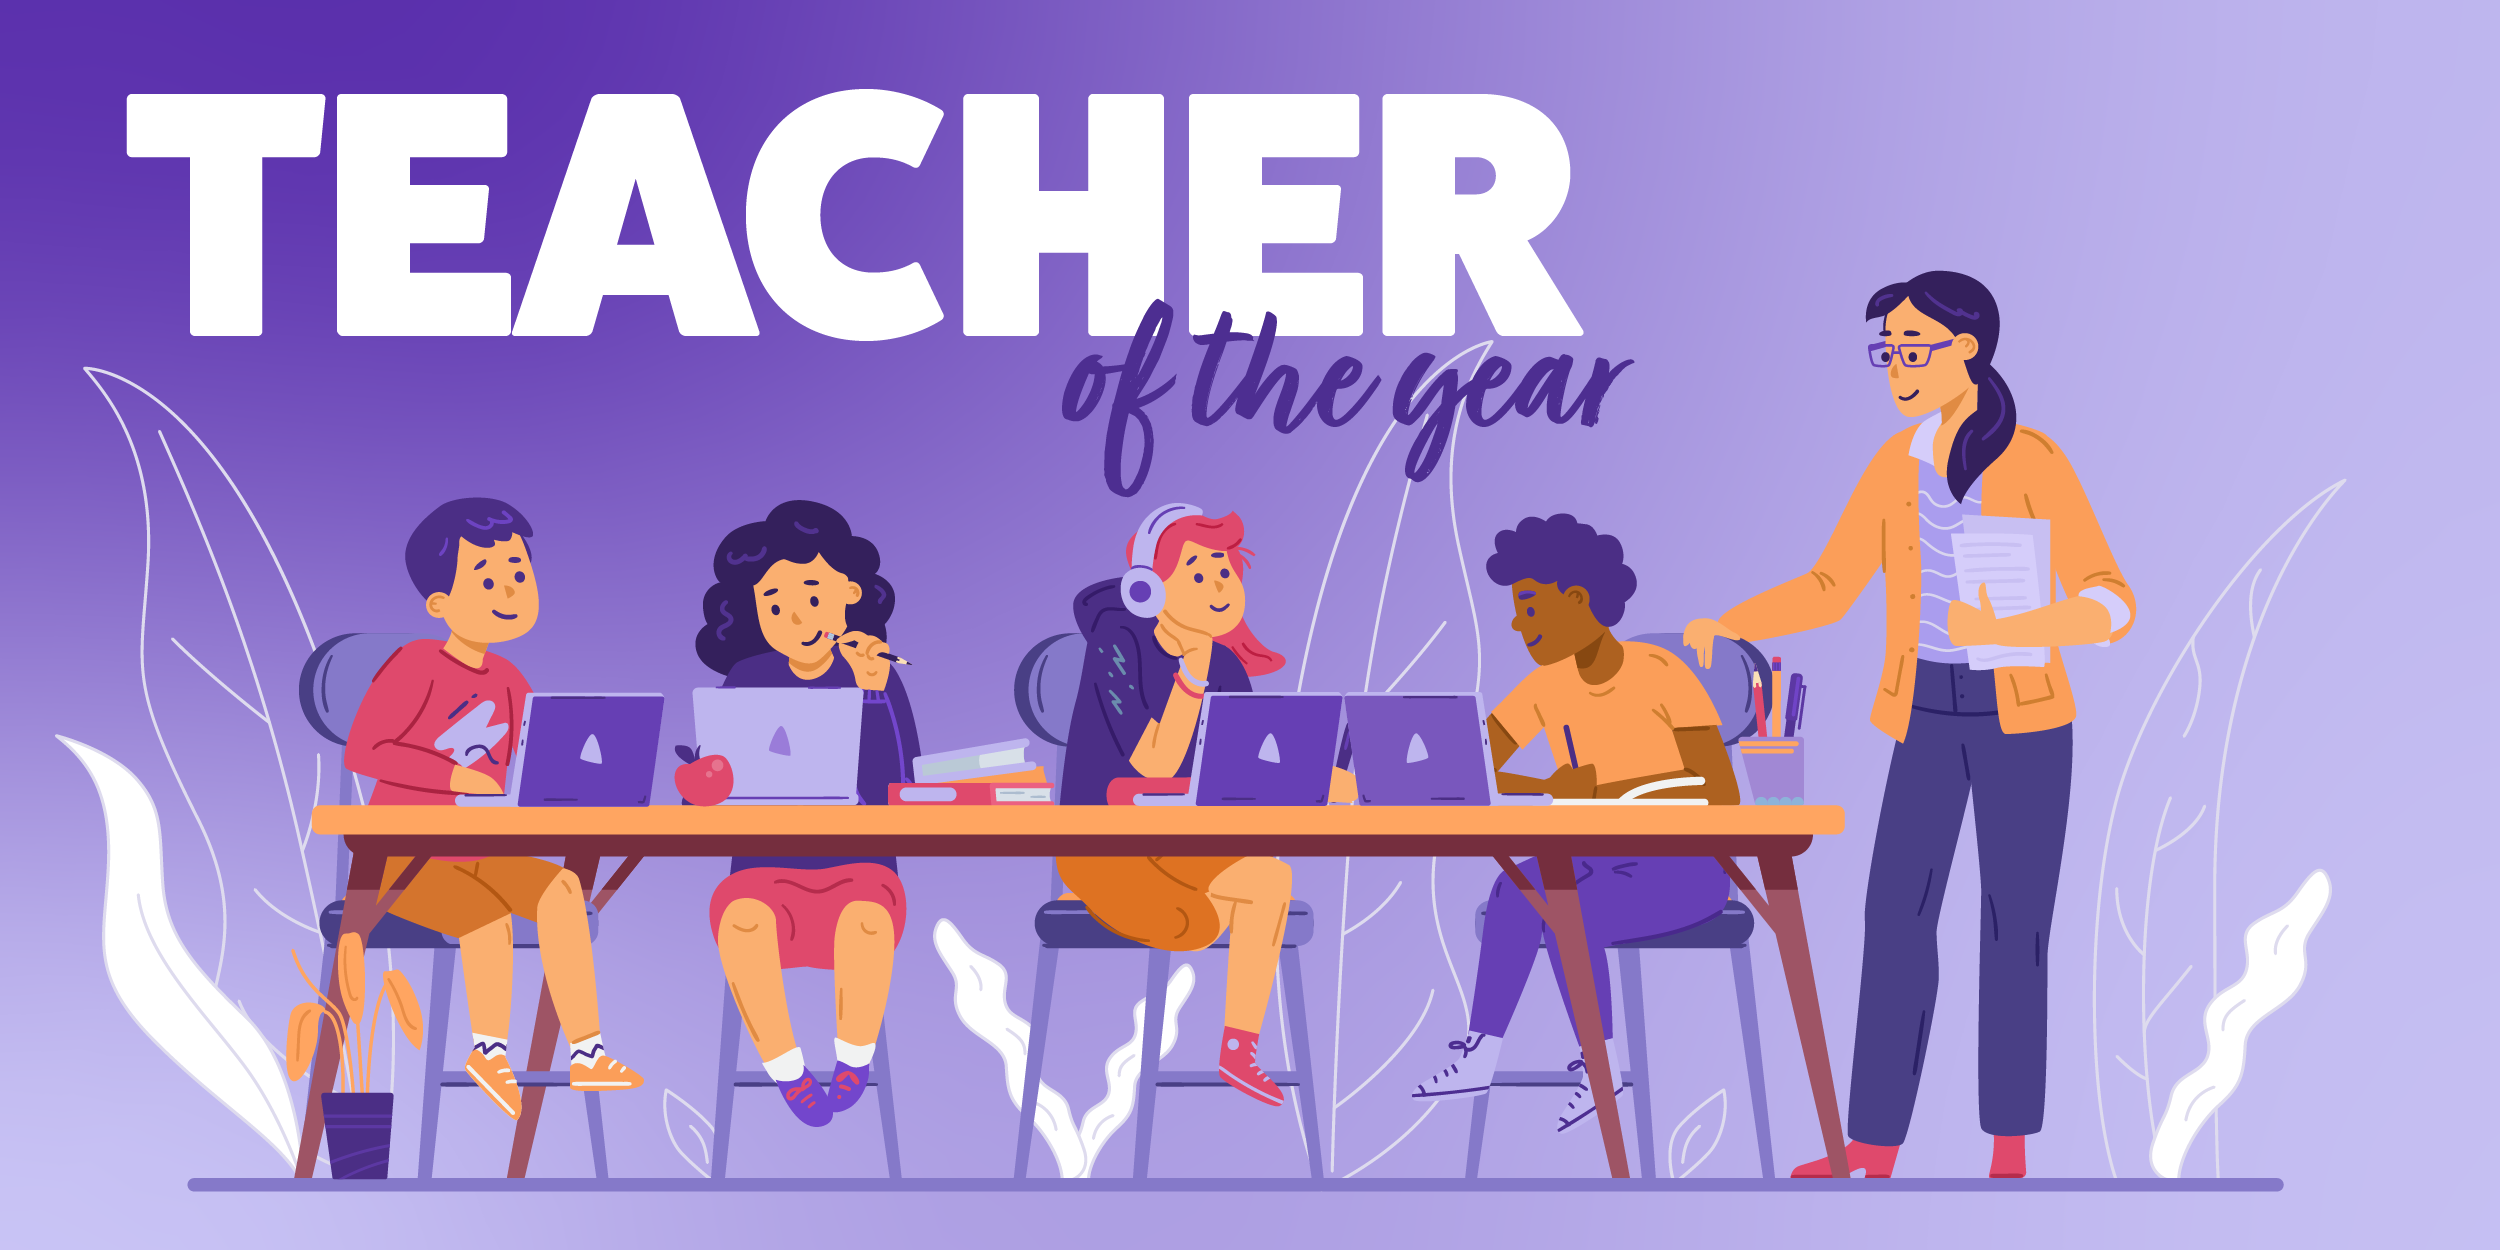 Teacher of the Year - illustration of a teacher and students